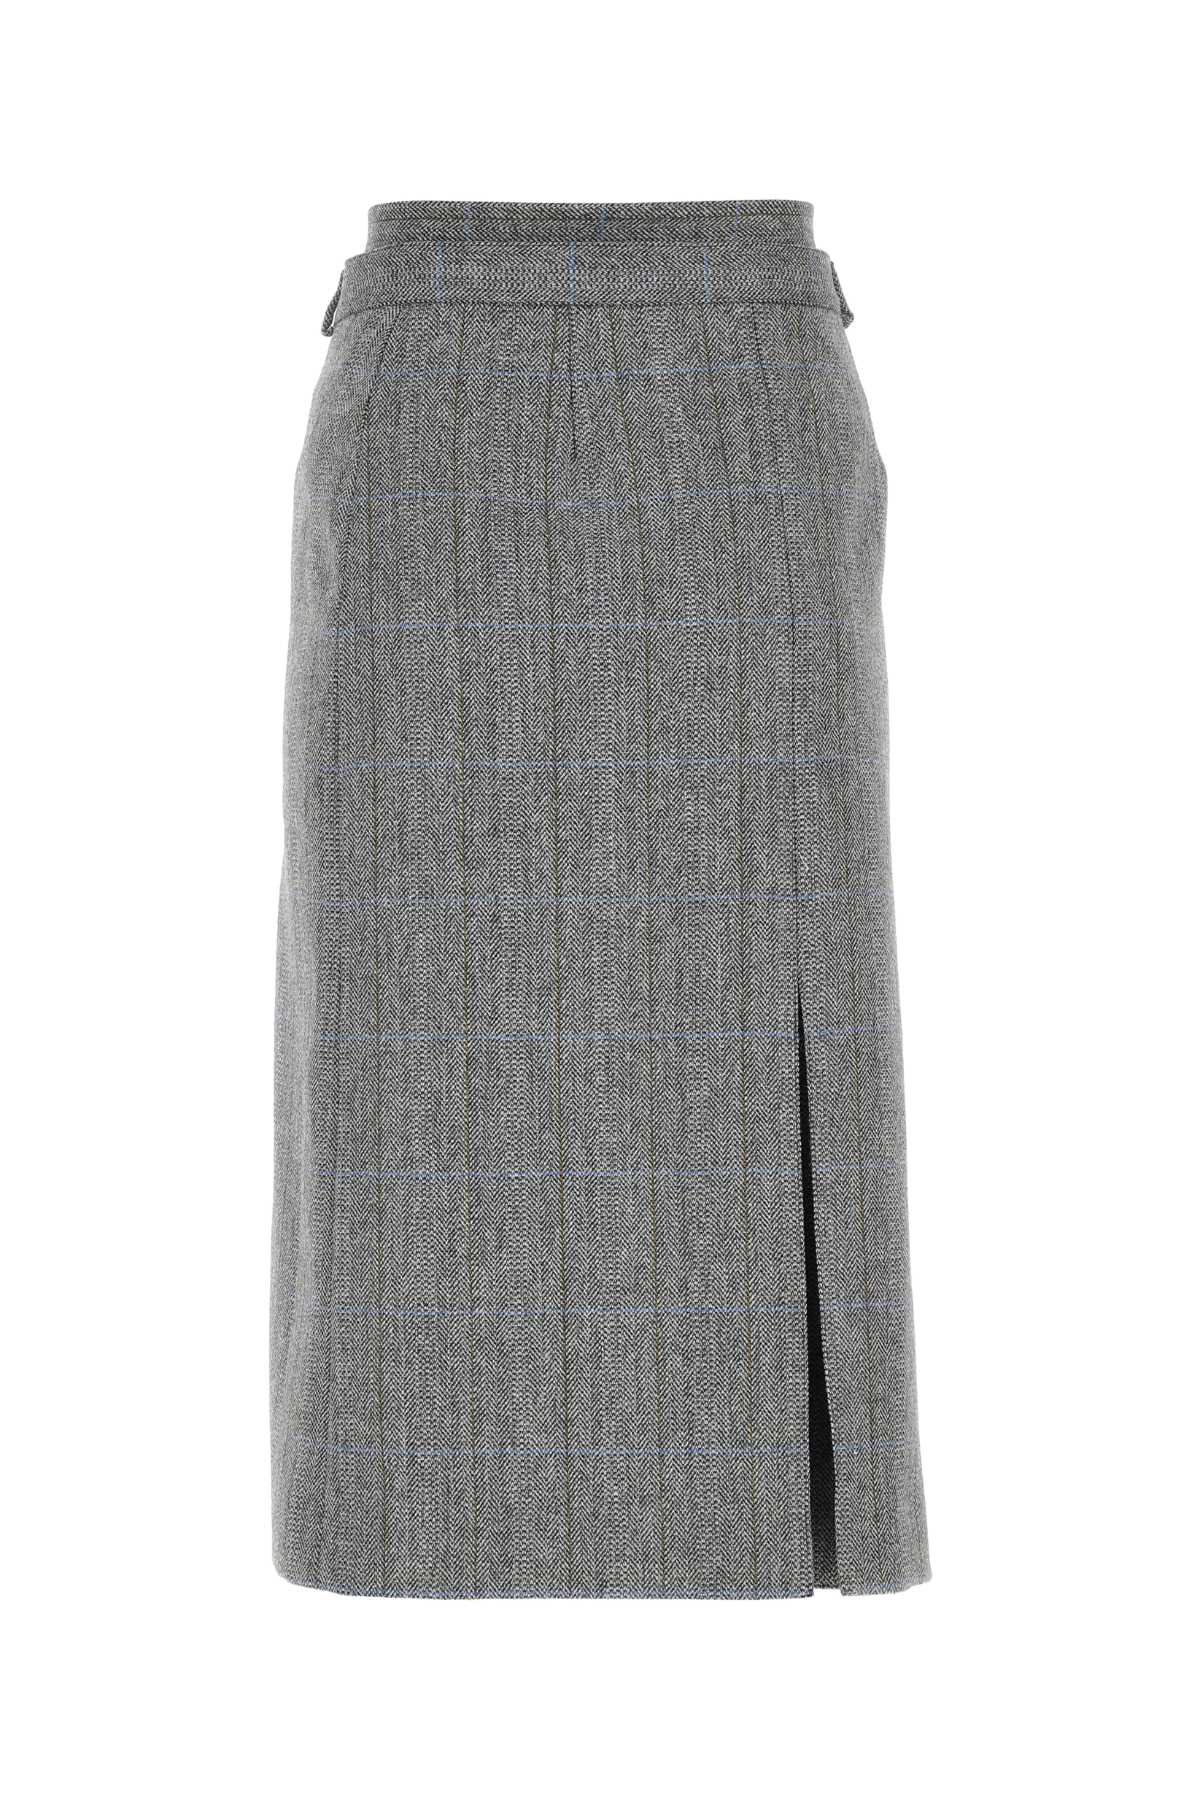 Maison Margiela Embroidered Wool Skirt In 001f